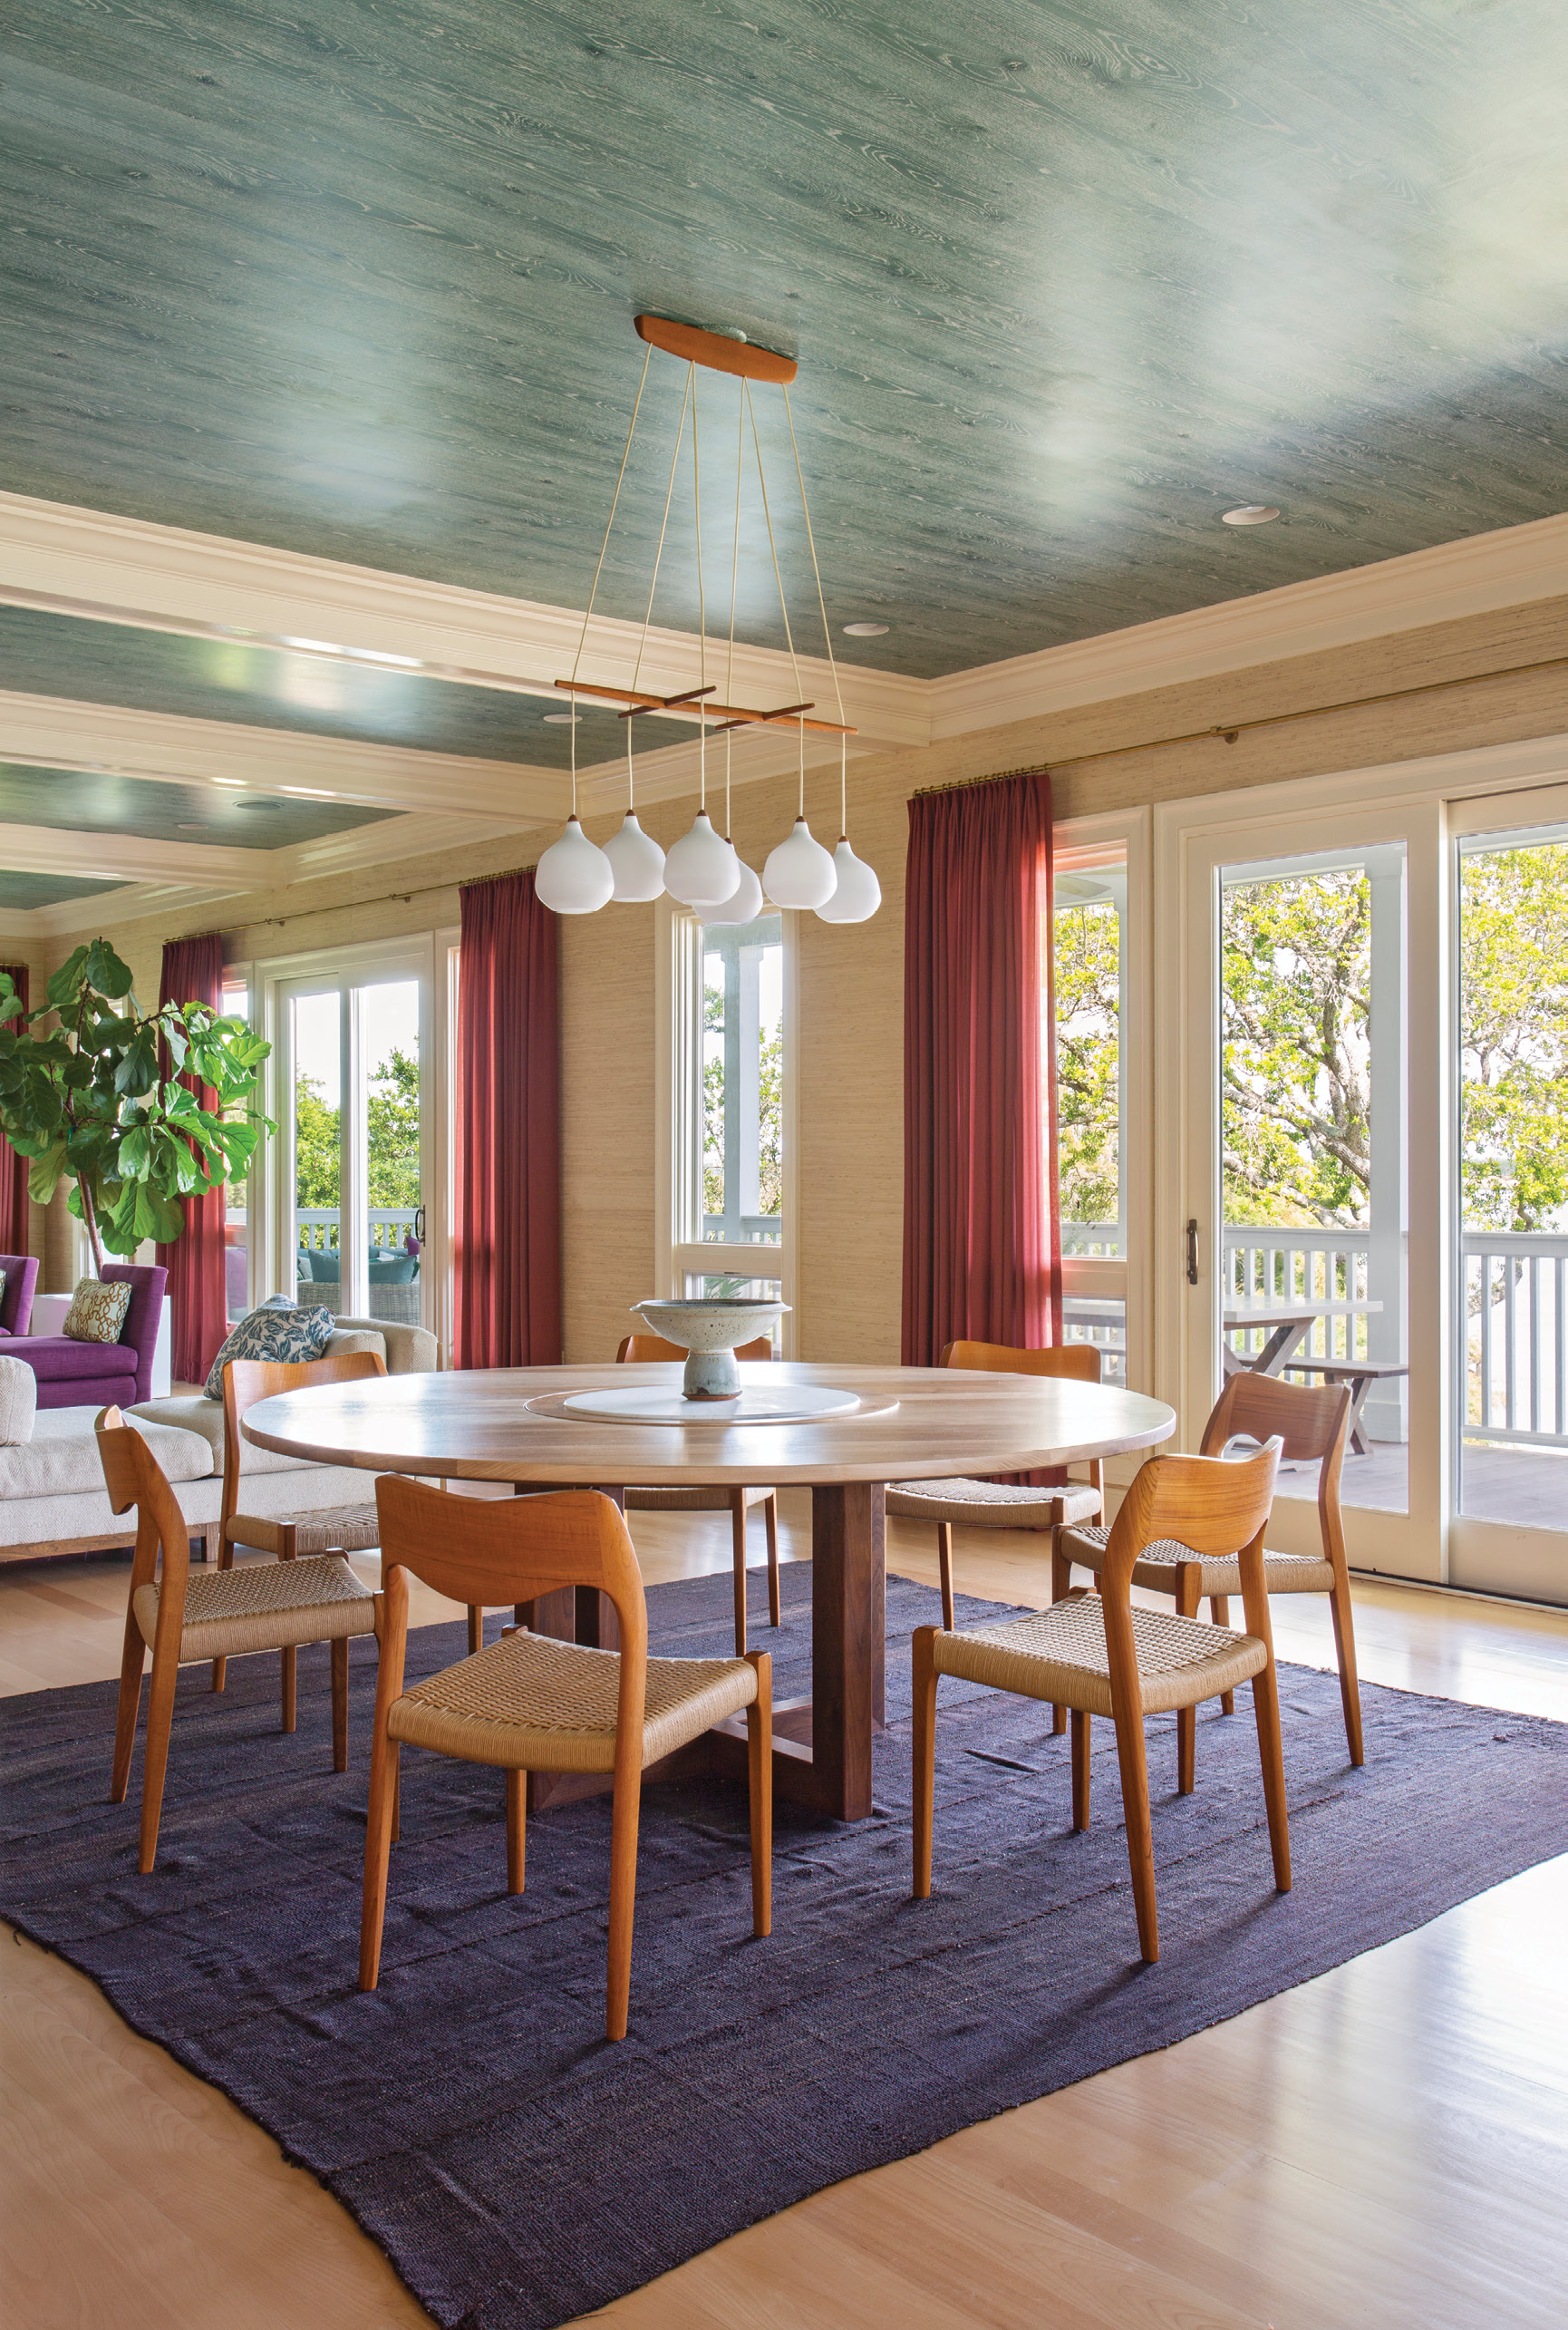 “A round table was definitely called for here,” says Hranowsky, who was seeking to balance the kitchen’s linear shapes. Her carpenter custom created the walnut dining table, outfitted with a marble lazy Susan that was Phil’s engineering. A vintage Danish teak and white glass chandelier from 1stDibs adds casual spunk to the dining room without obstructing views into the kitchen or out to the waterway.